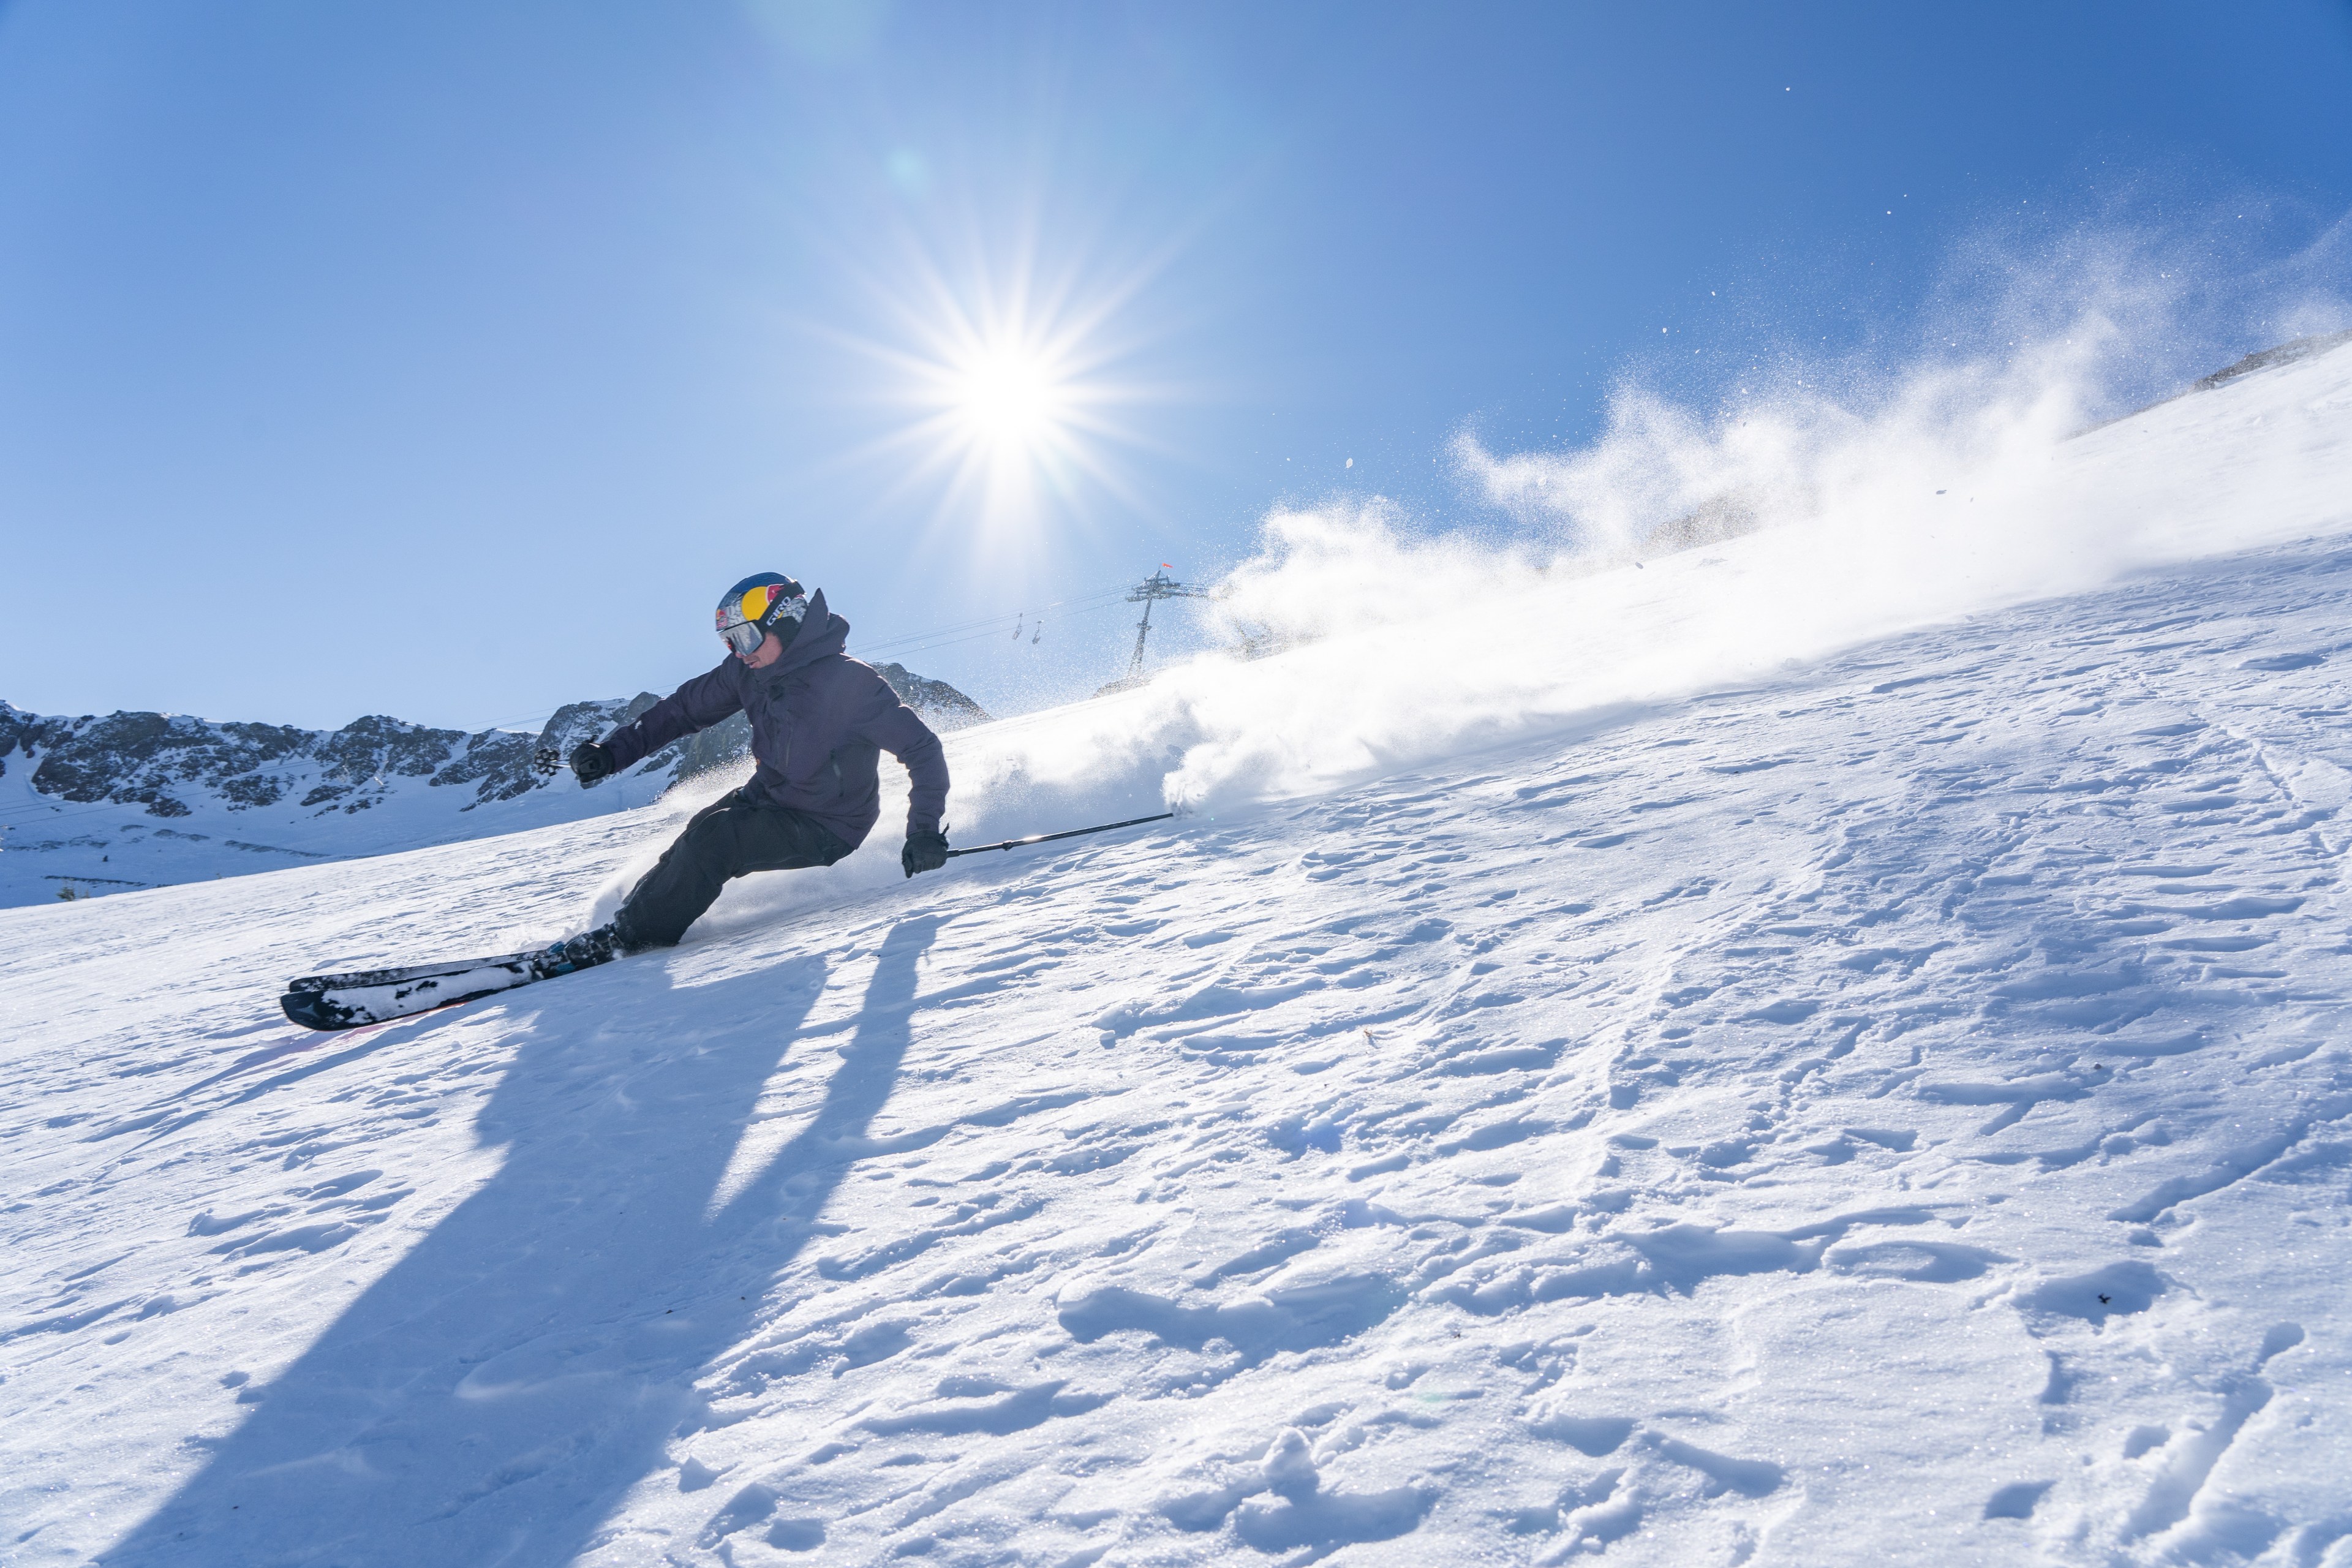 A person skis down the side of a snowy mountain under a sunny sky.